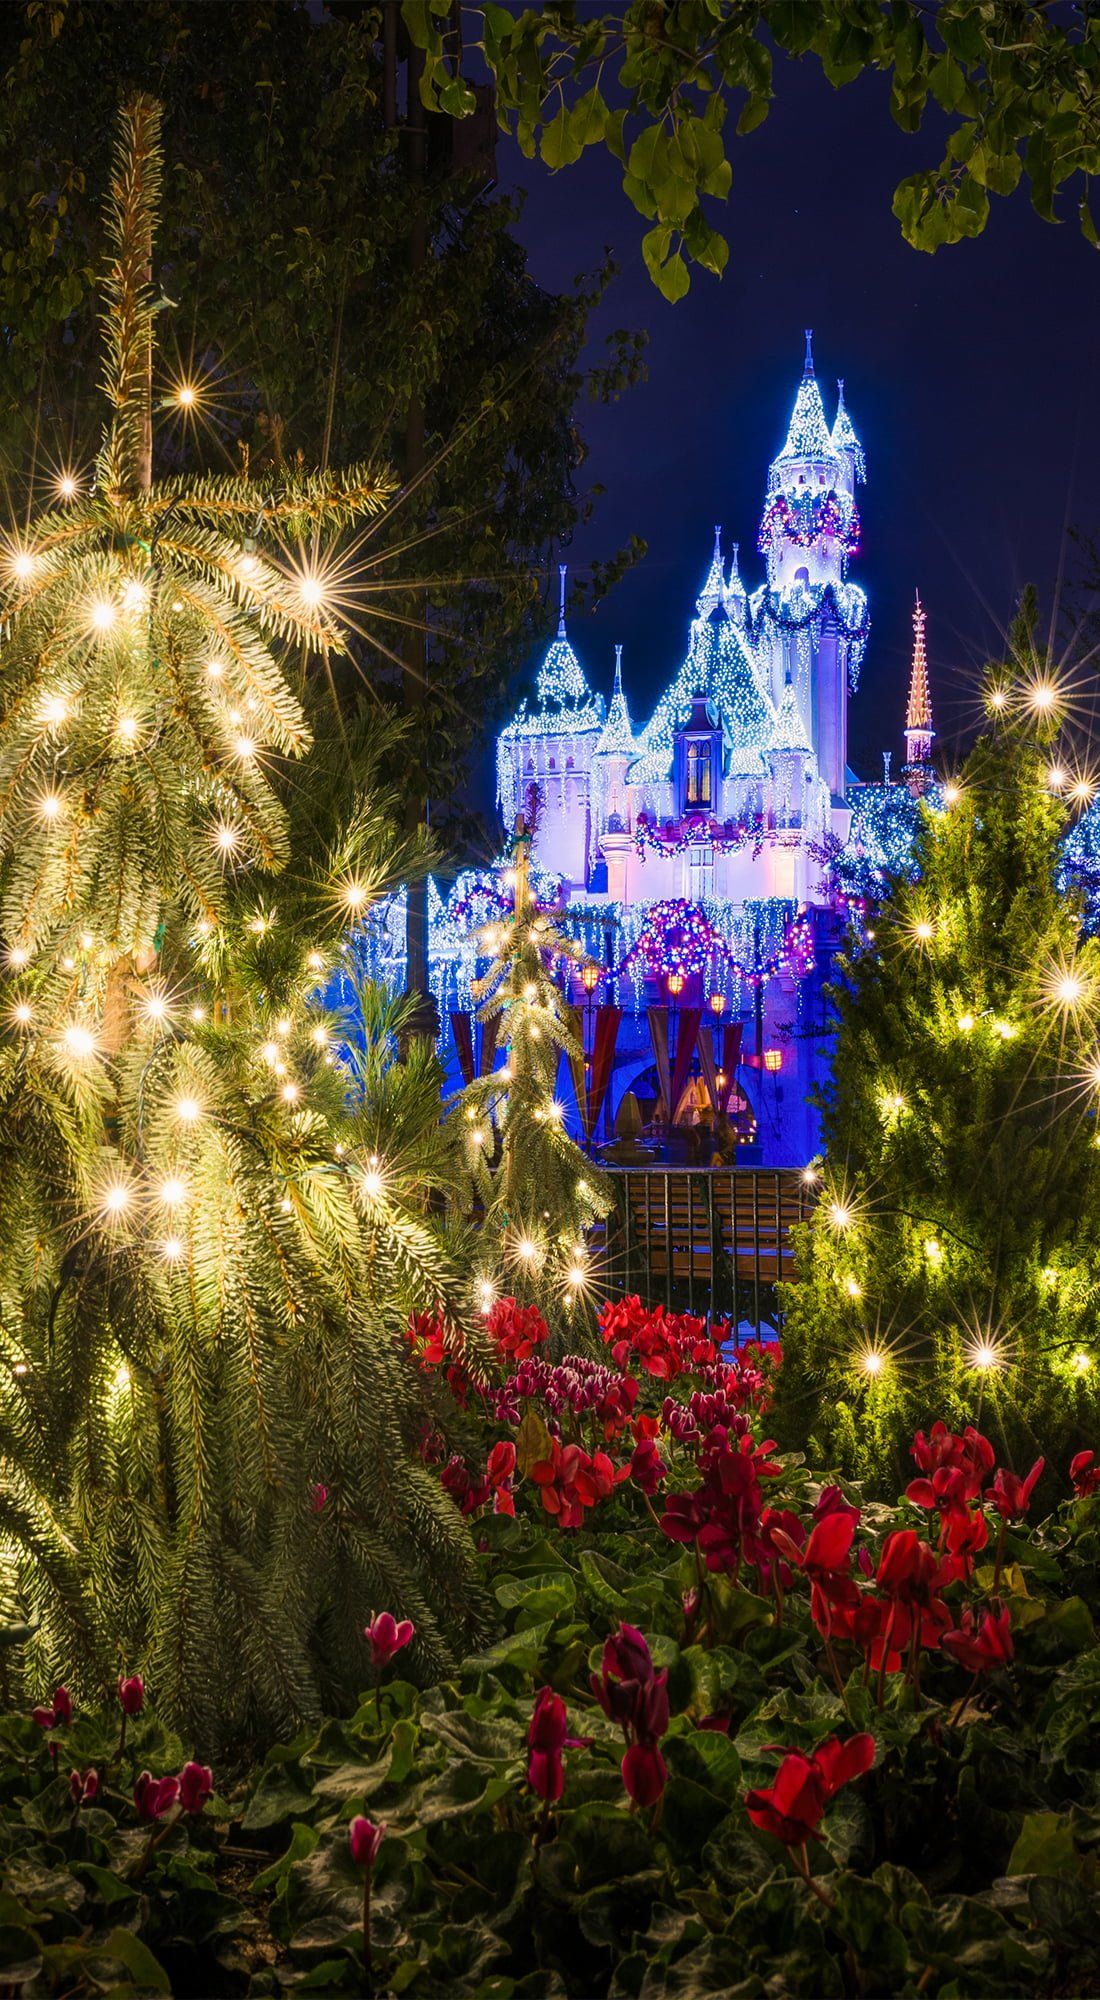 Disneyland's Sleeping Beauty Castle is lit up with Christmas lights and surrounded by trees and flowers. - Disneyland